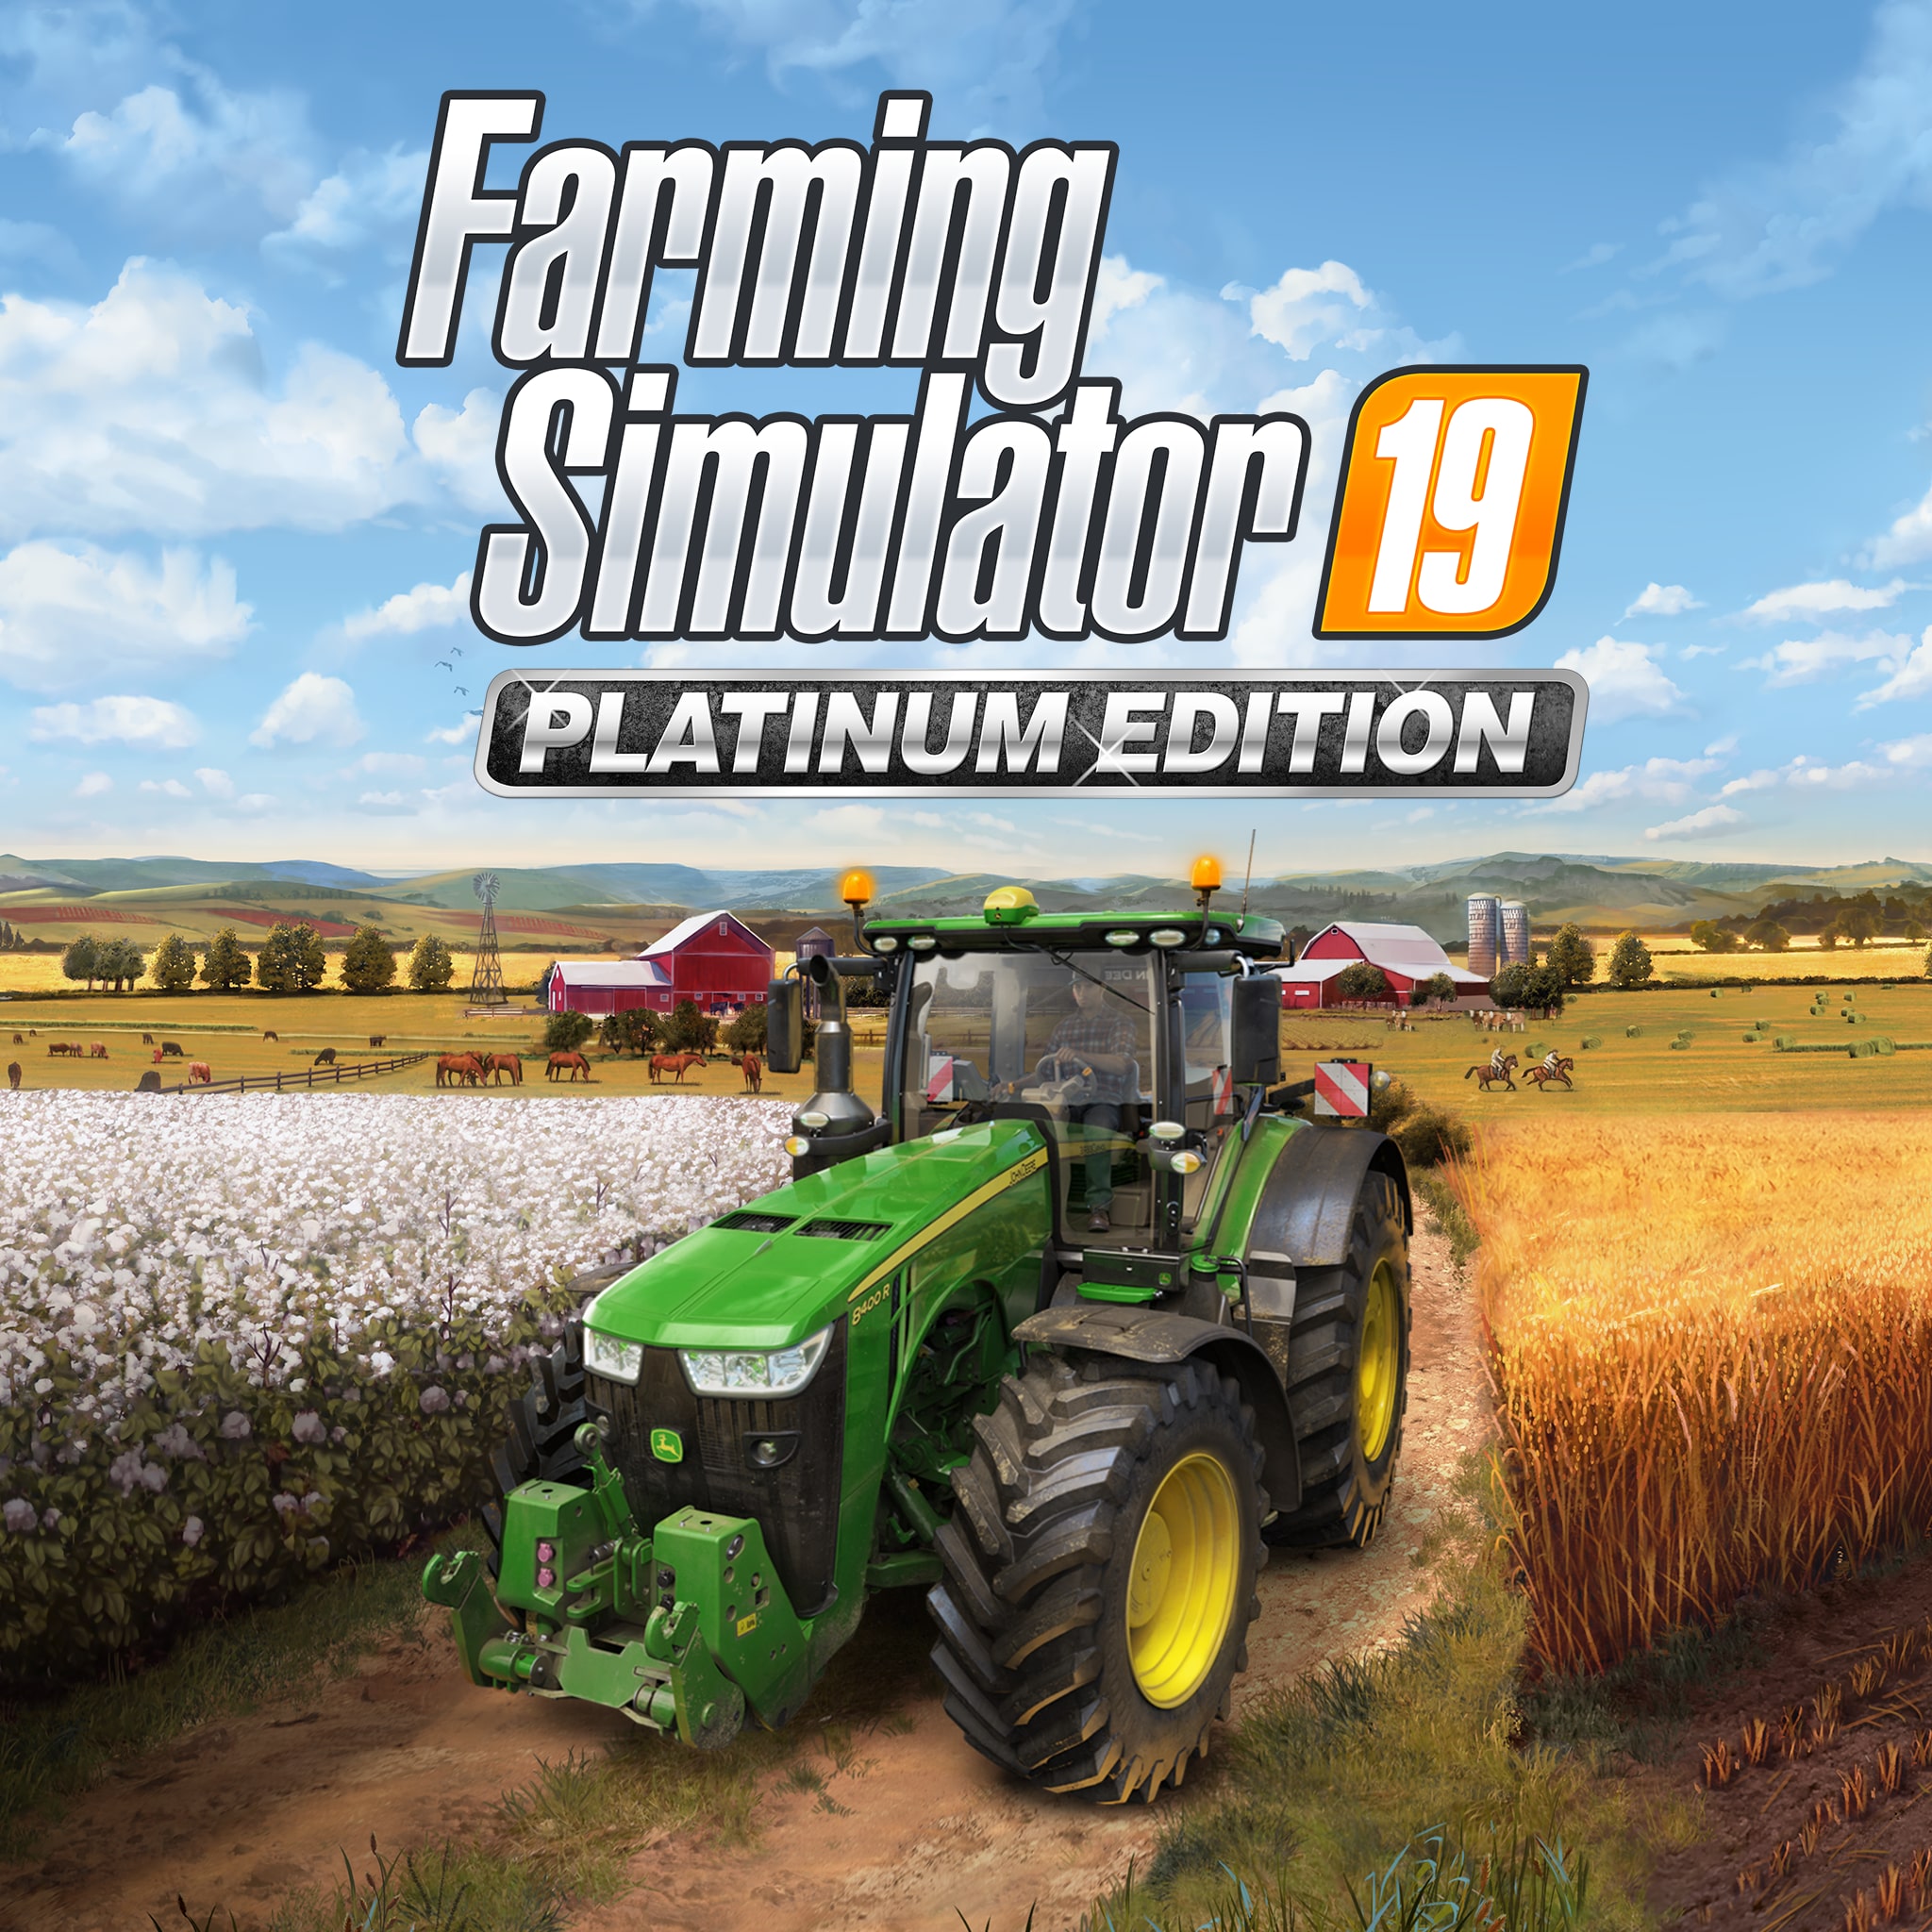 Somatic cell county obesity Farming Simulator 19